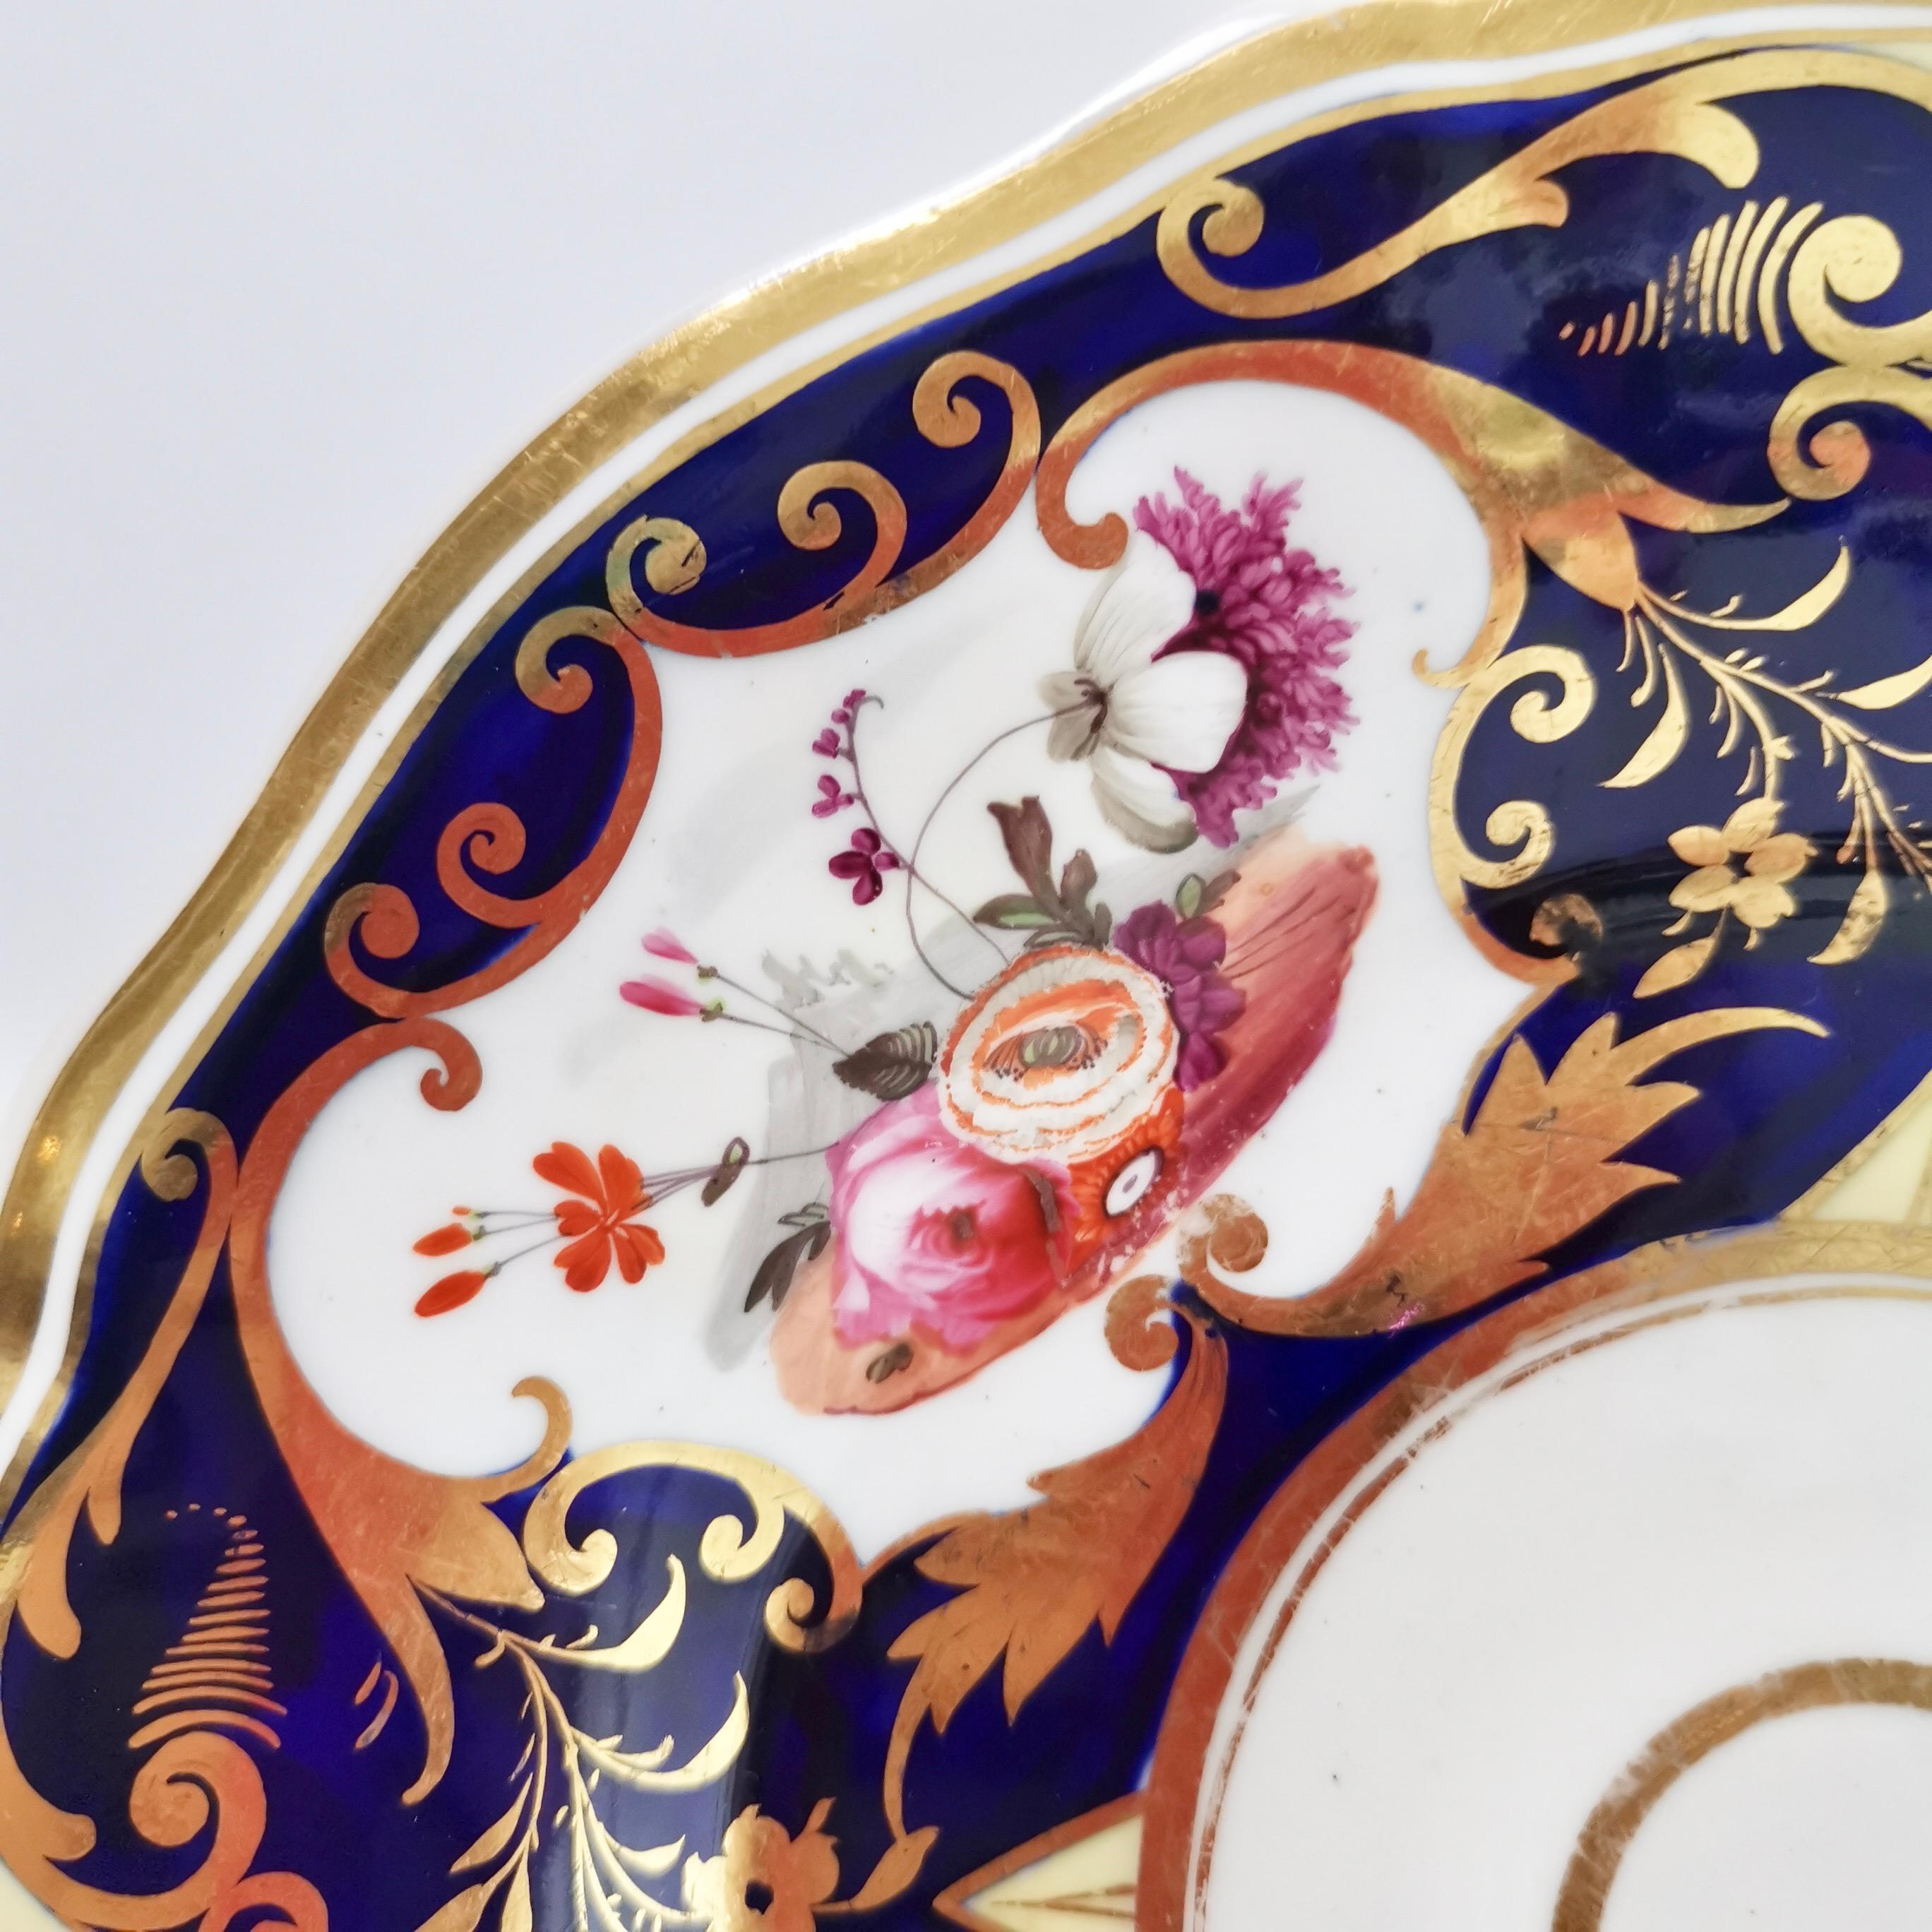 This is a beautiful plate made by Yates in about 1826, which is known as the Regency period. It is decorated with a striking pattern in cobalt blue, gilt and hand painted flowers.
 
The Yates factory was operative between 1784 and 1836 and was